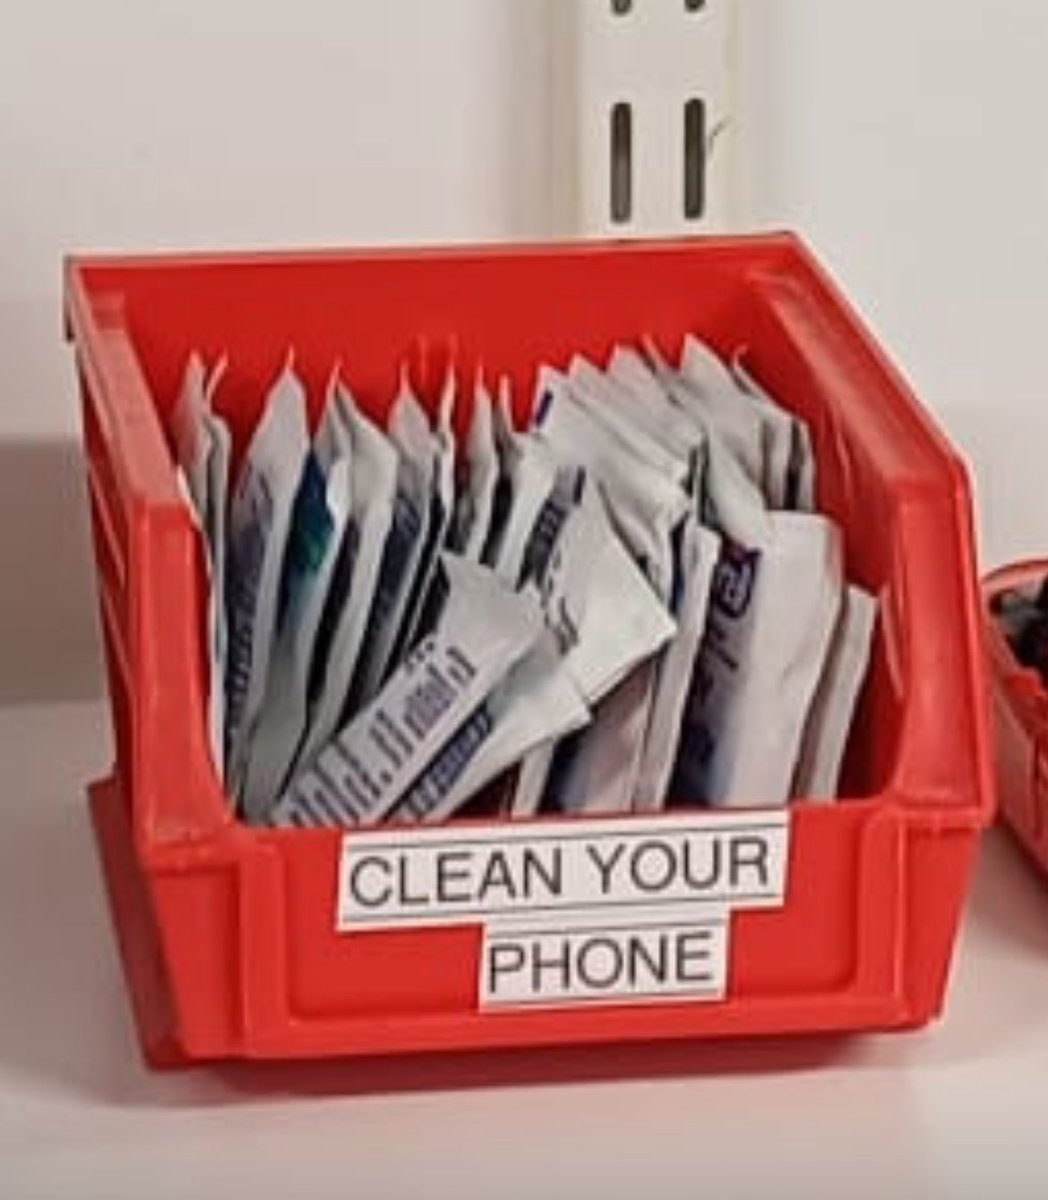 L31 in @Leeds_Childrens have added a clean your phone spot to the entrance of the ward. This recognises that mobile phones can be at risk of passing on microorganisms. Brilliant initiative from the team. @LeedsHospitals